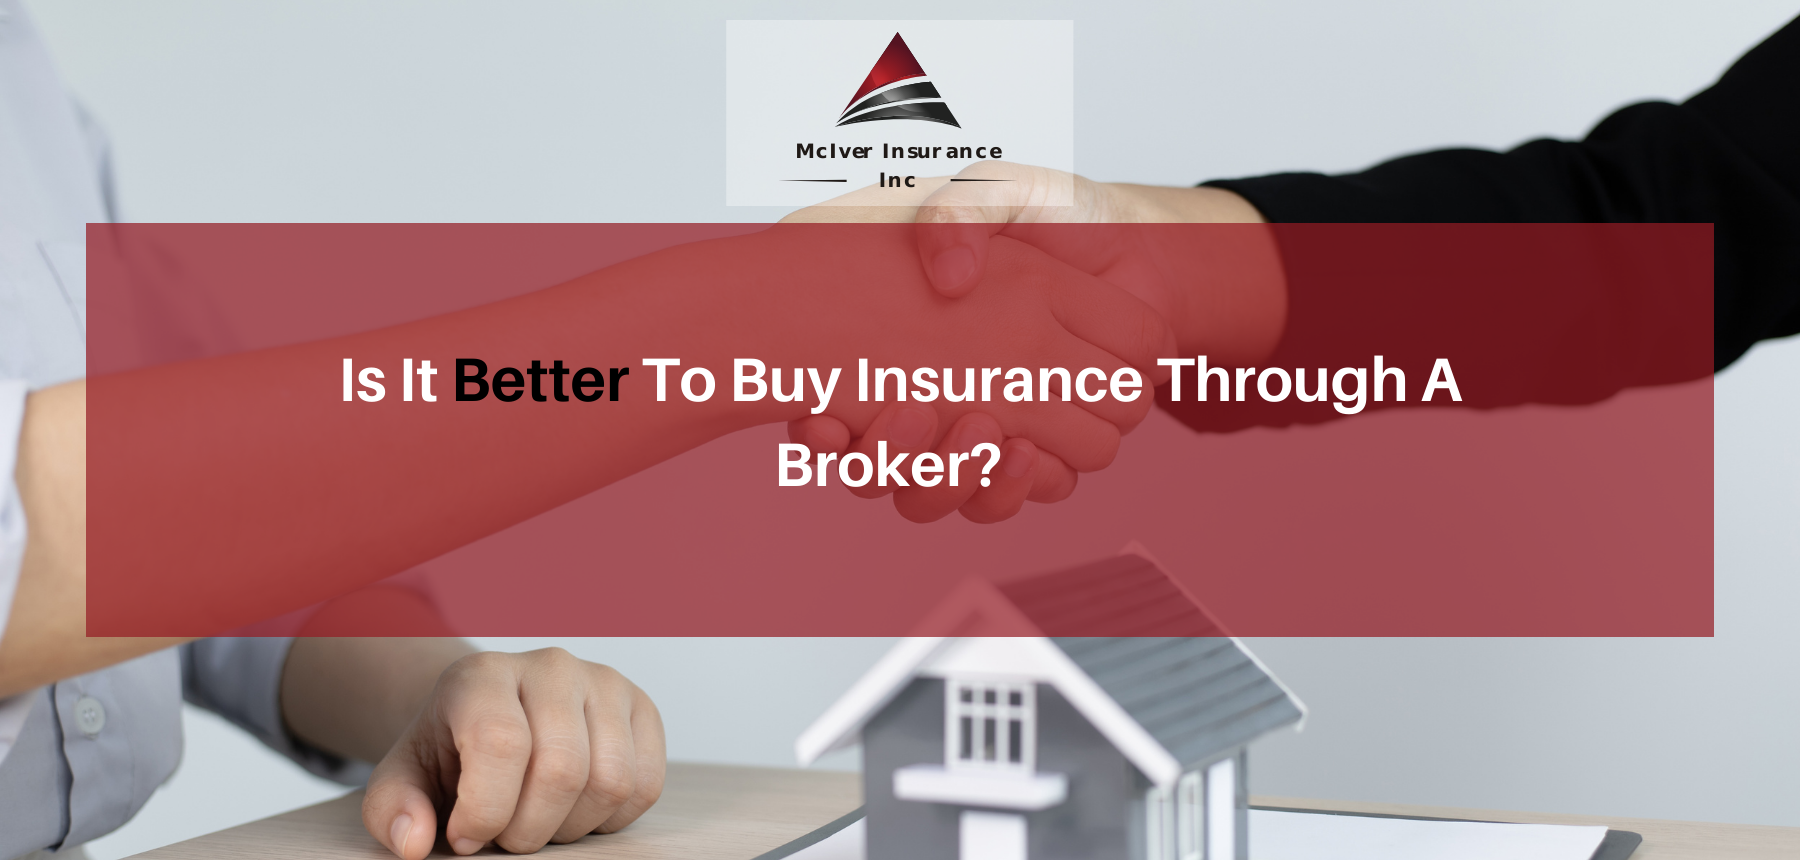 Is It Better To Buy Insurance Through A Broker